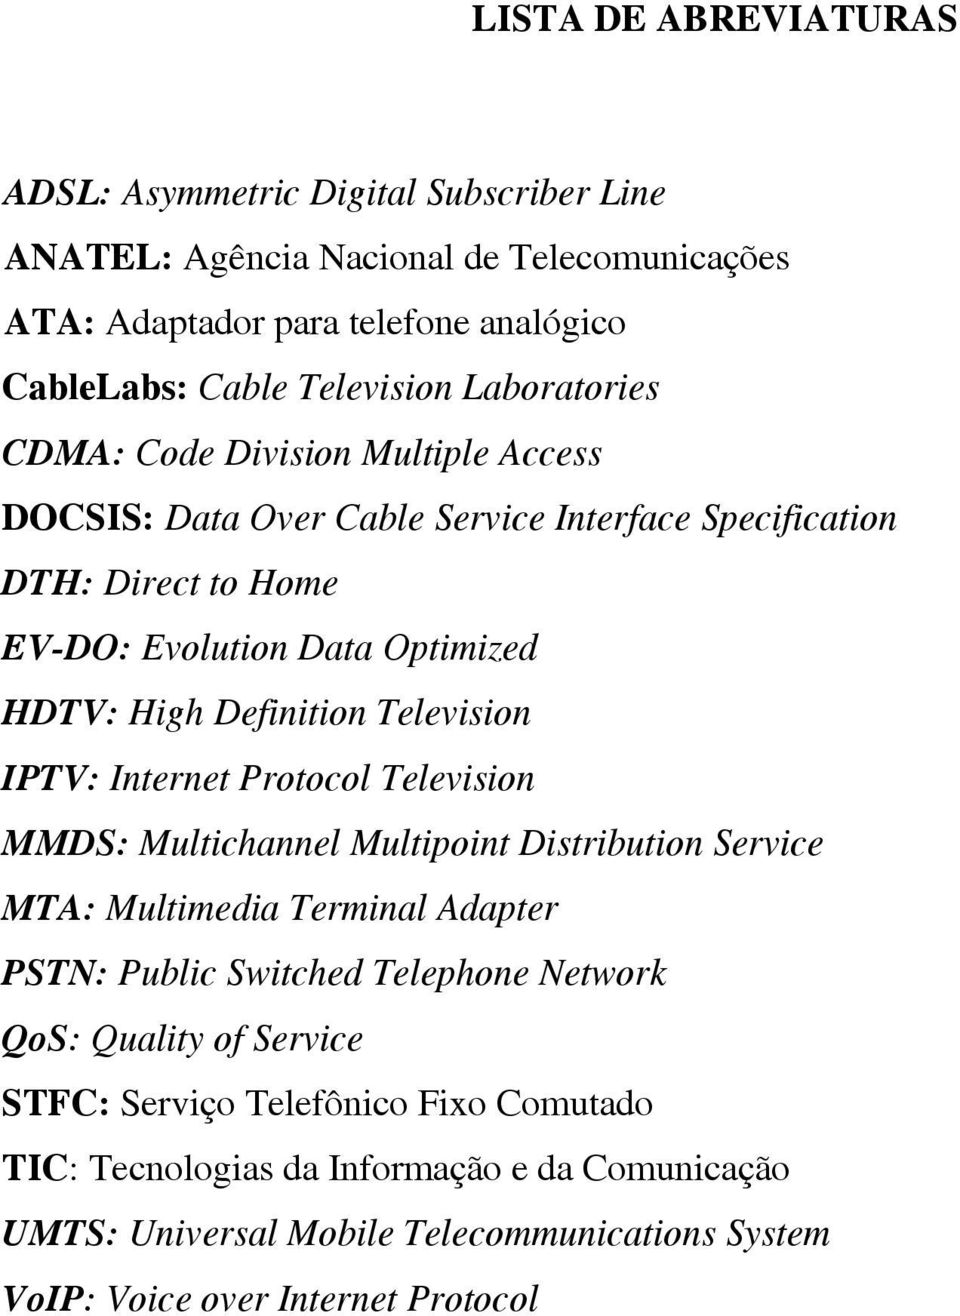 Television IPTV: Internet Protocol Television MMDS: Multichannel Multipoint Distribution Service MTA: Multimedia Terminal Adapter PSTN: Public Switched Telephone Network QoS: